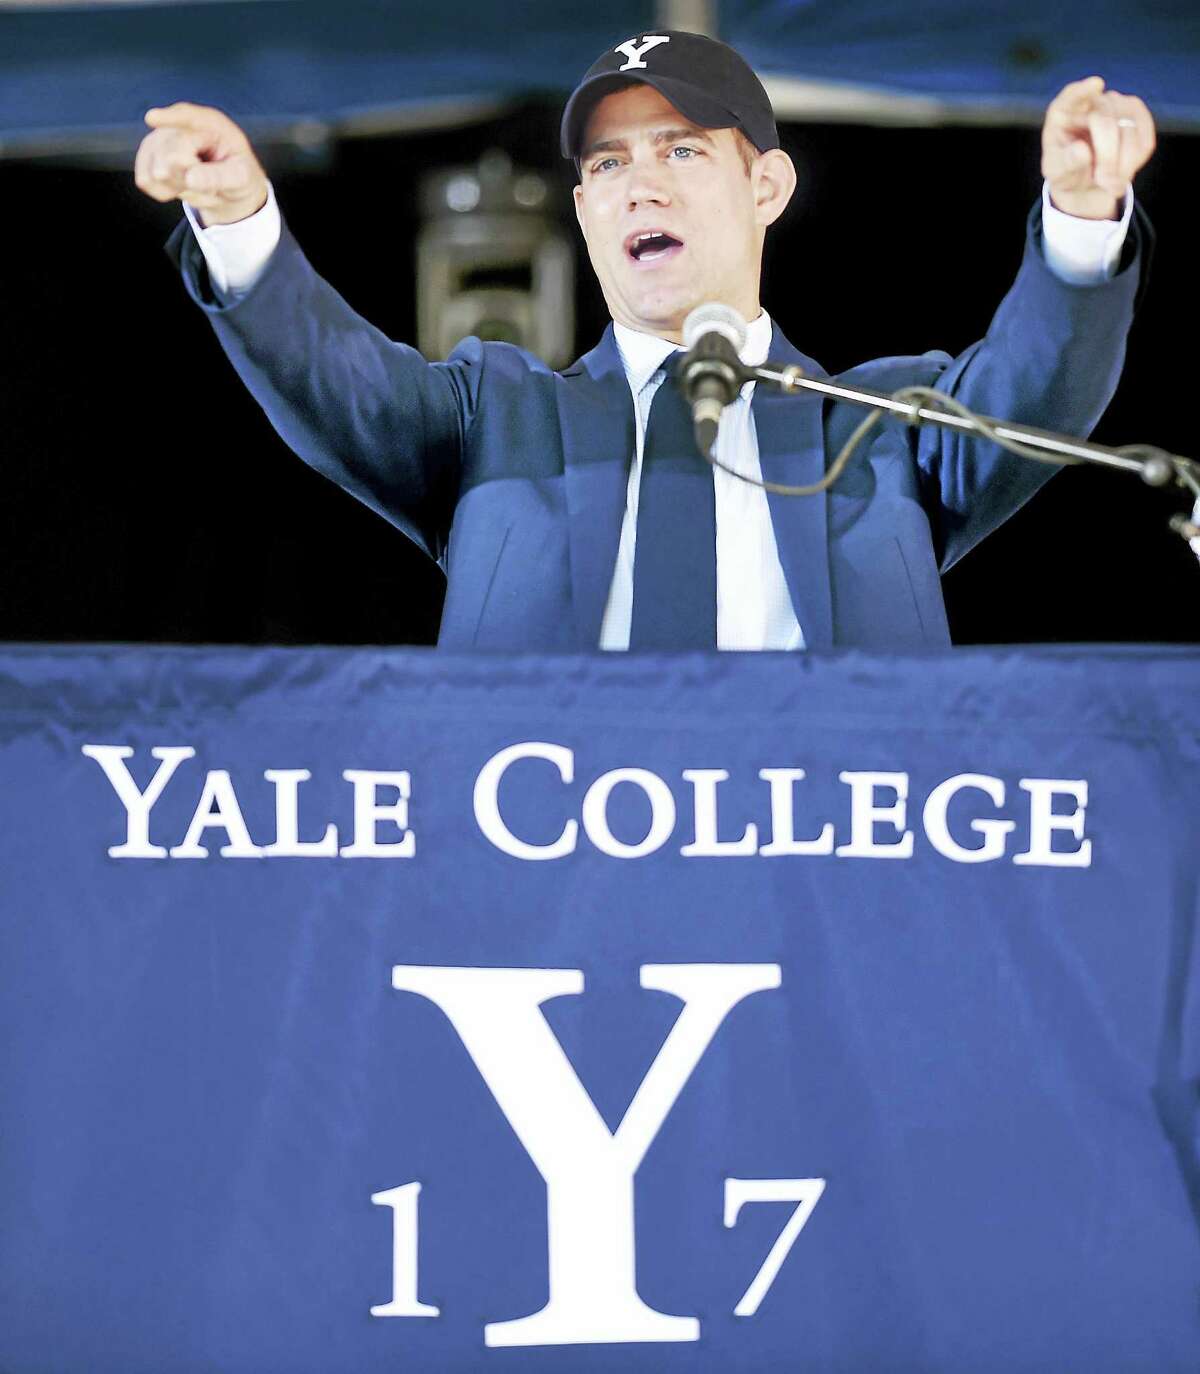 Theo Epstein, President of Baseball Operations for the Chicago Cubs, jokingly asks Yankees fans to exit Old Campus during his Class Day address at Yale on Sunday.